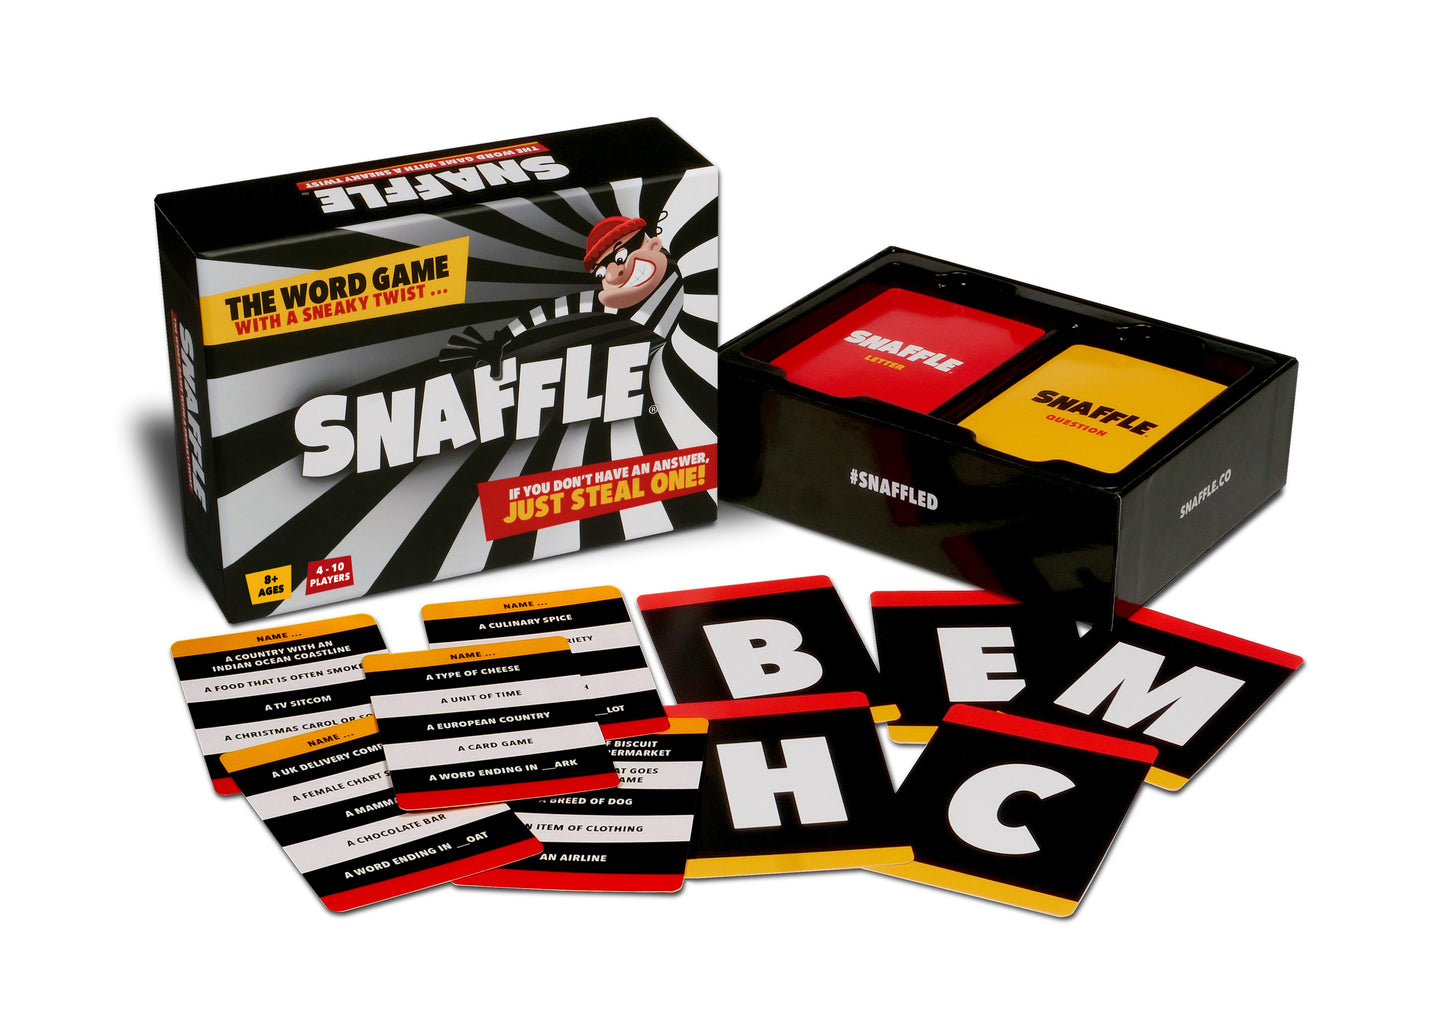 Snaffle® | The Word Game With a Sneaky Twist